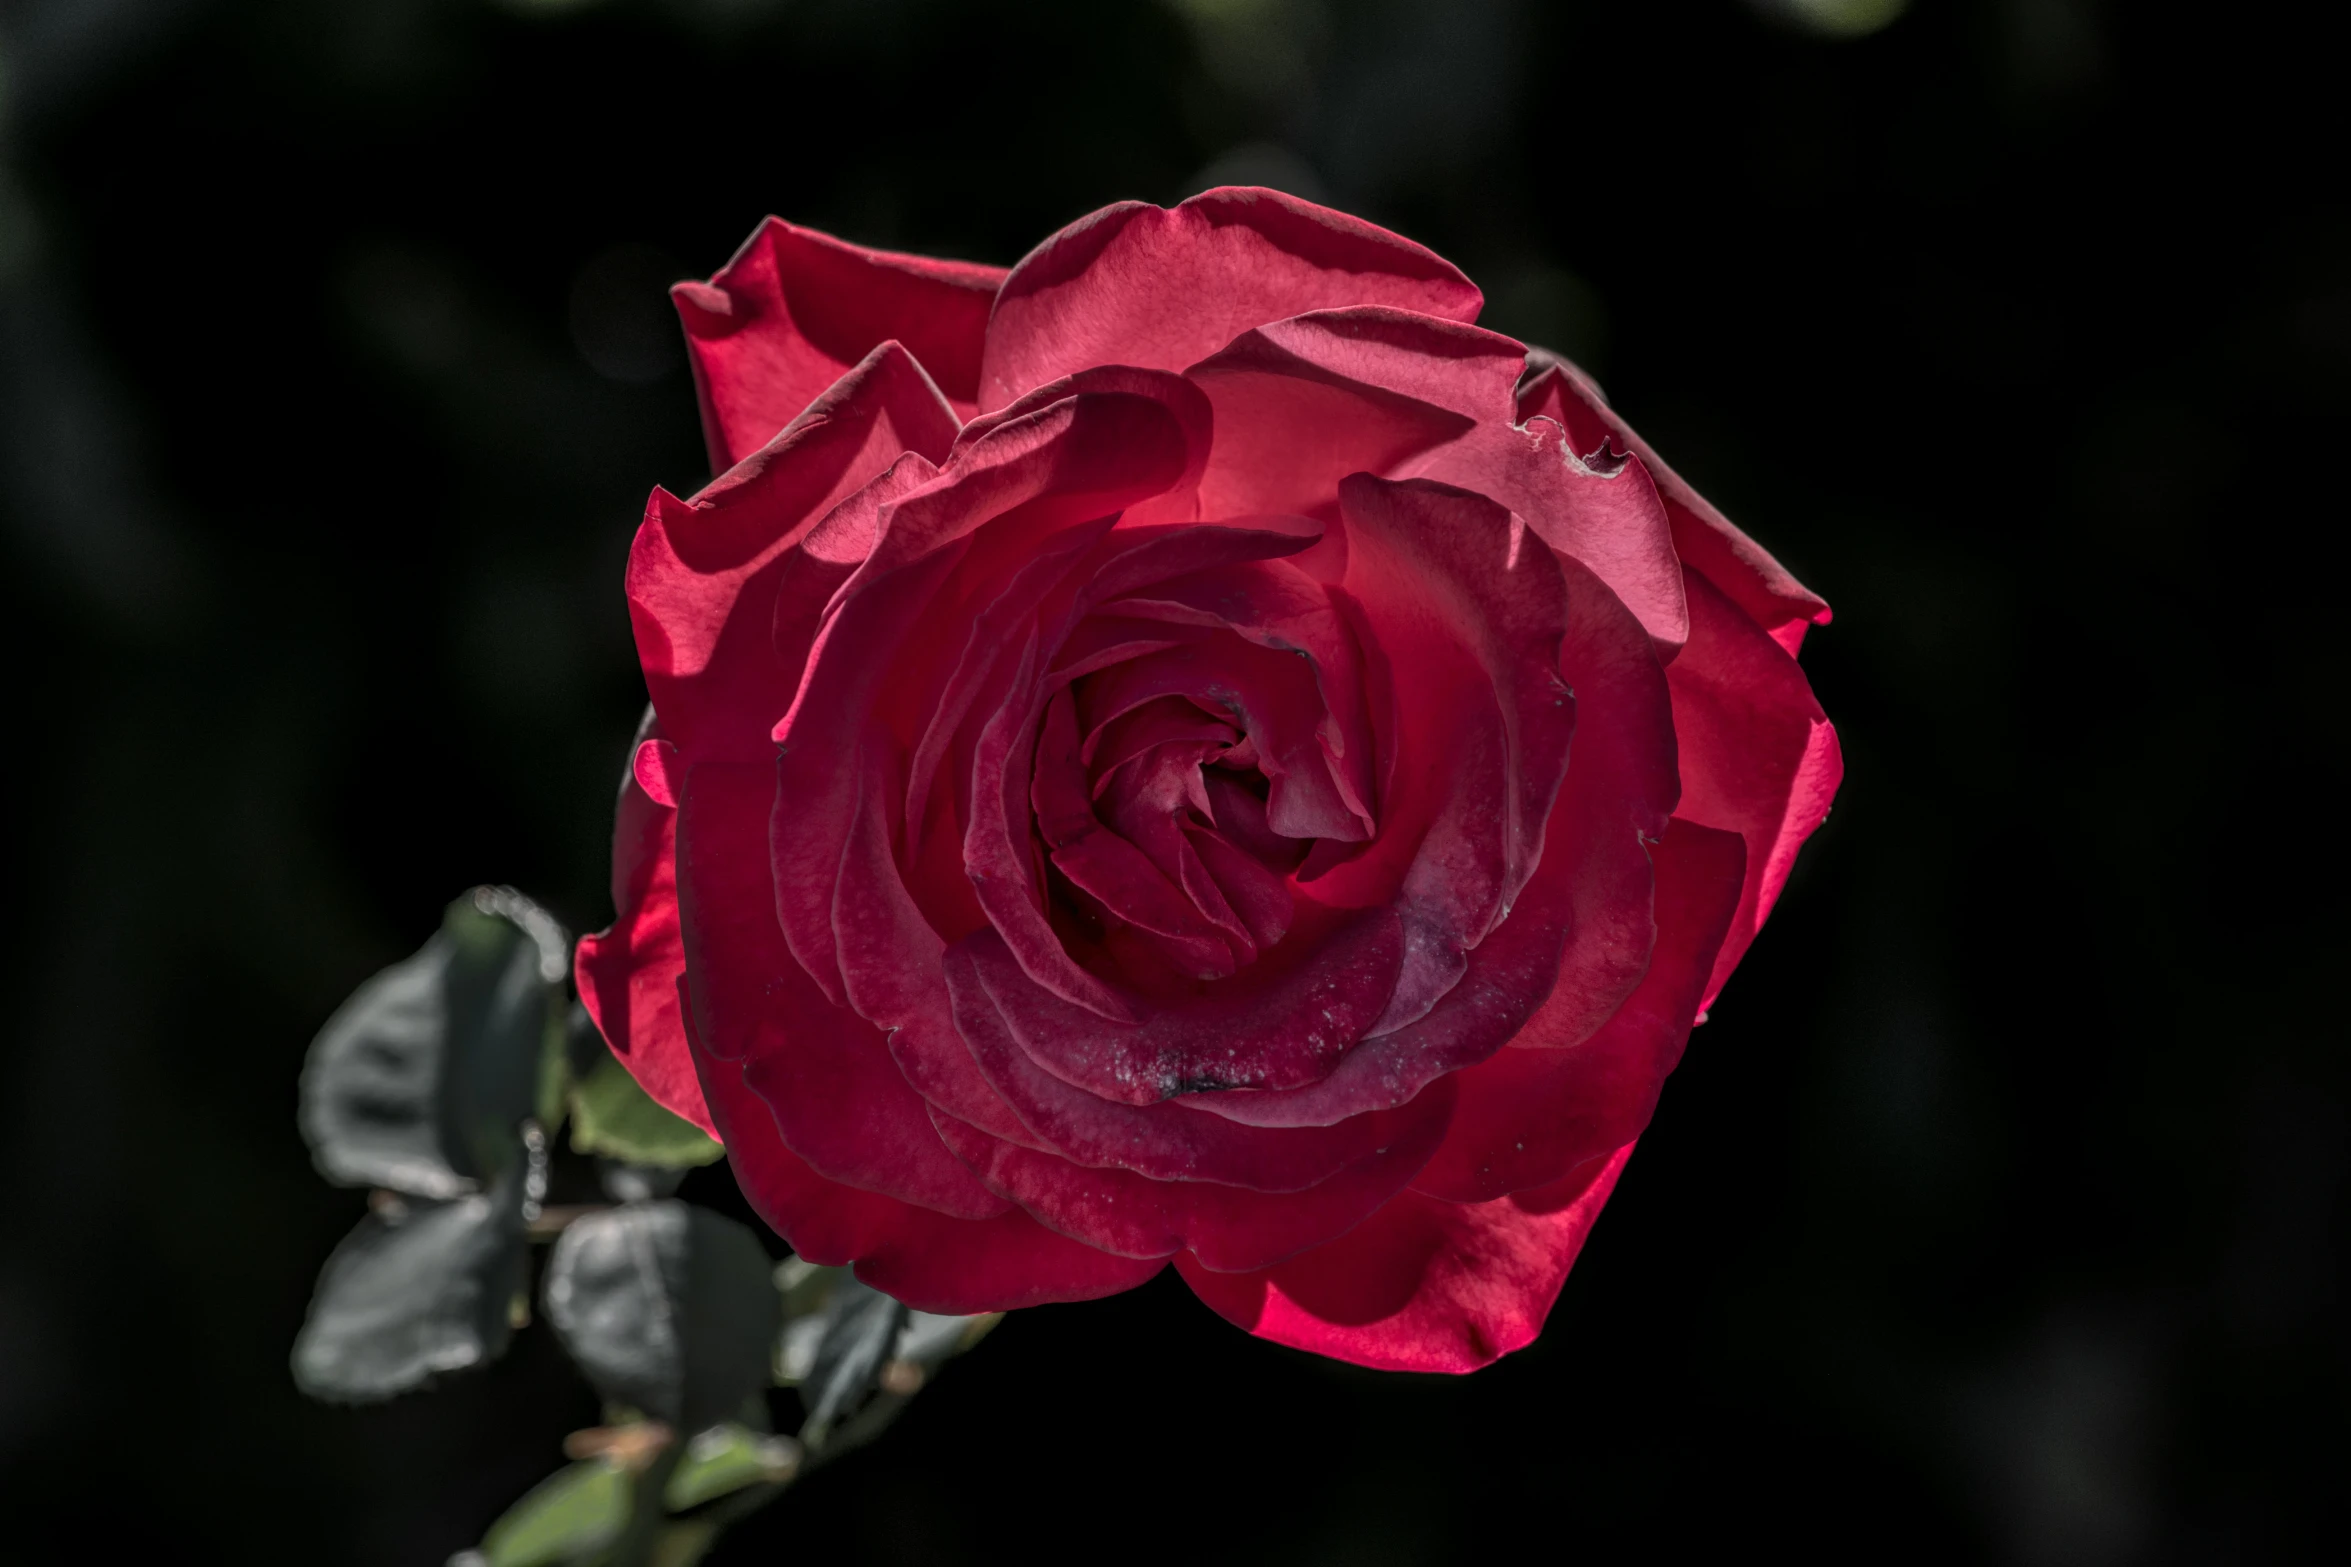 the large, red rose is blooming from its stem